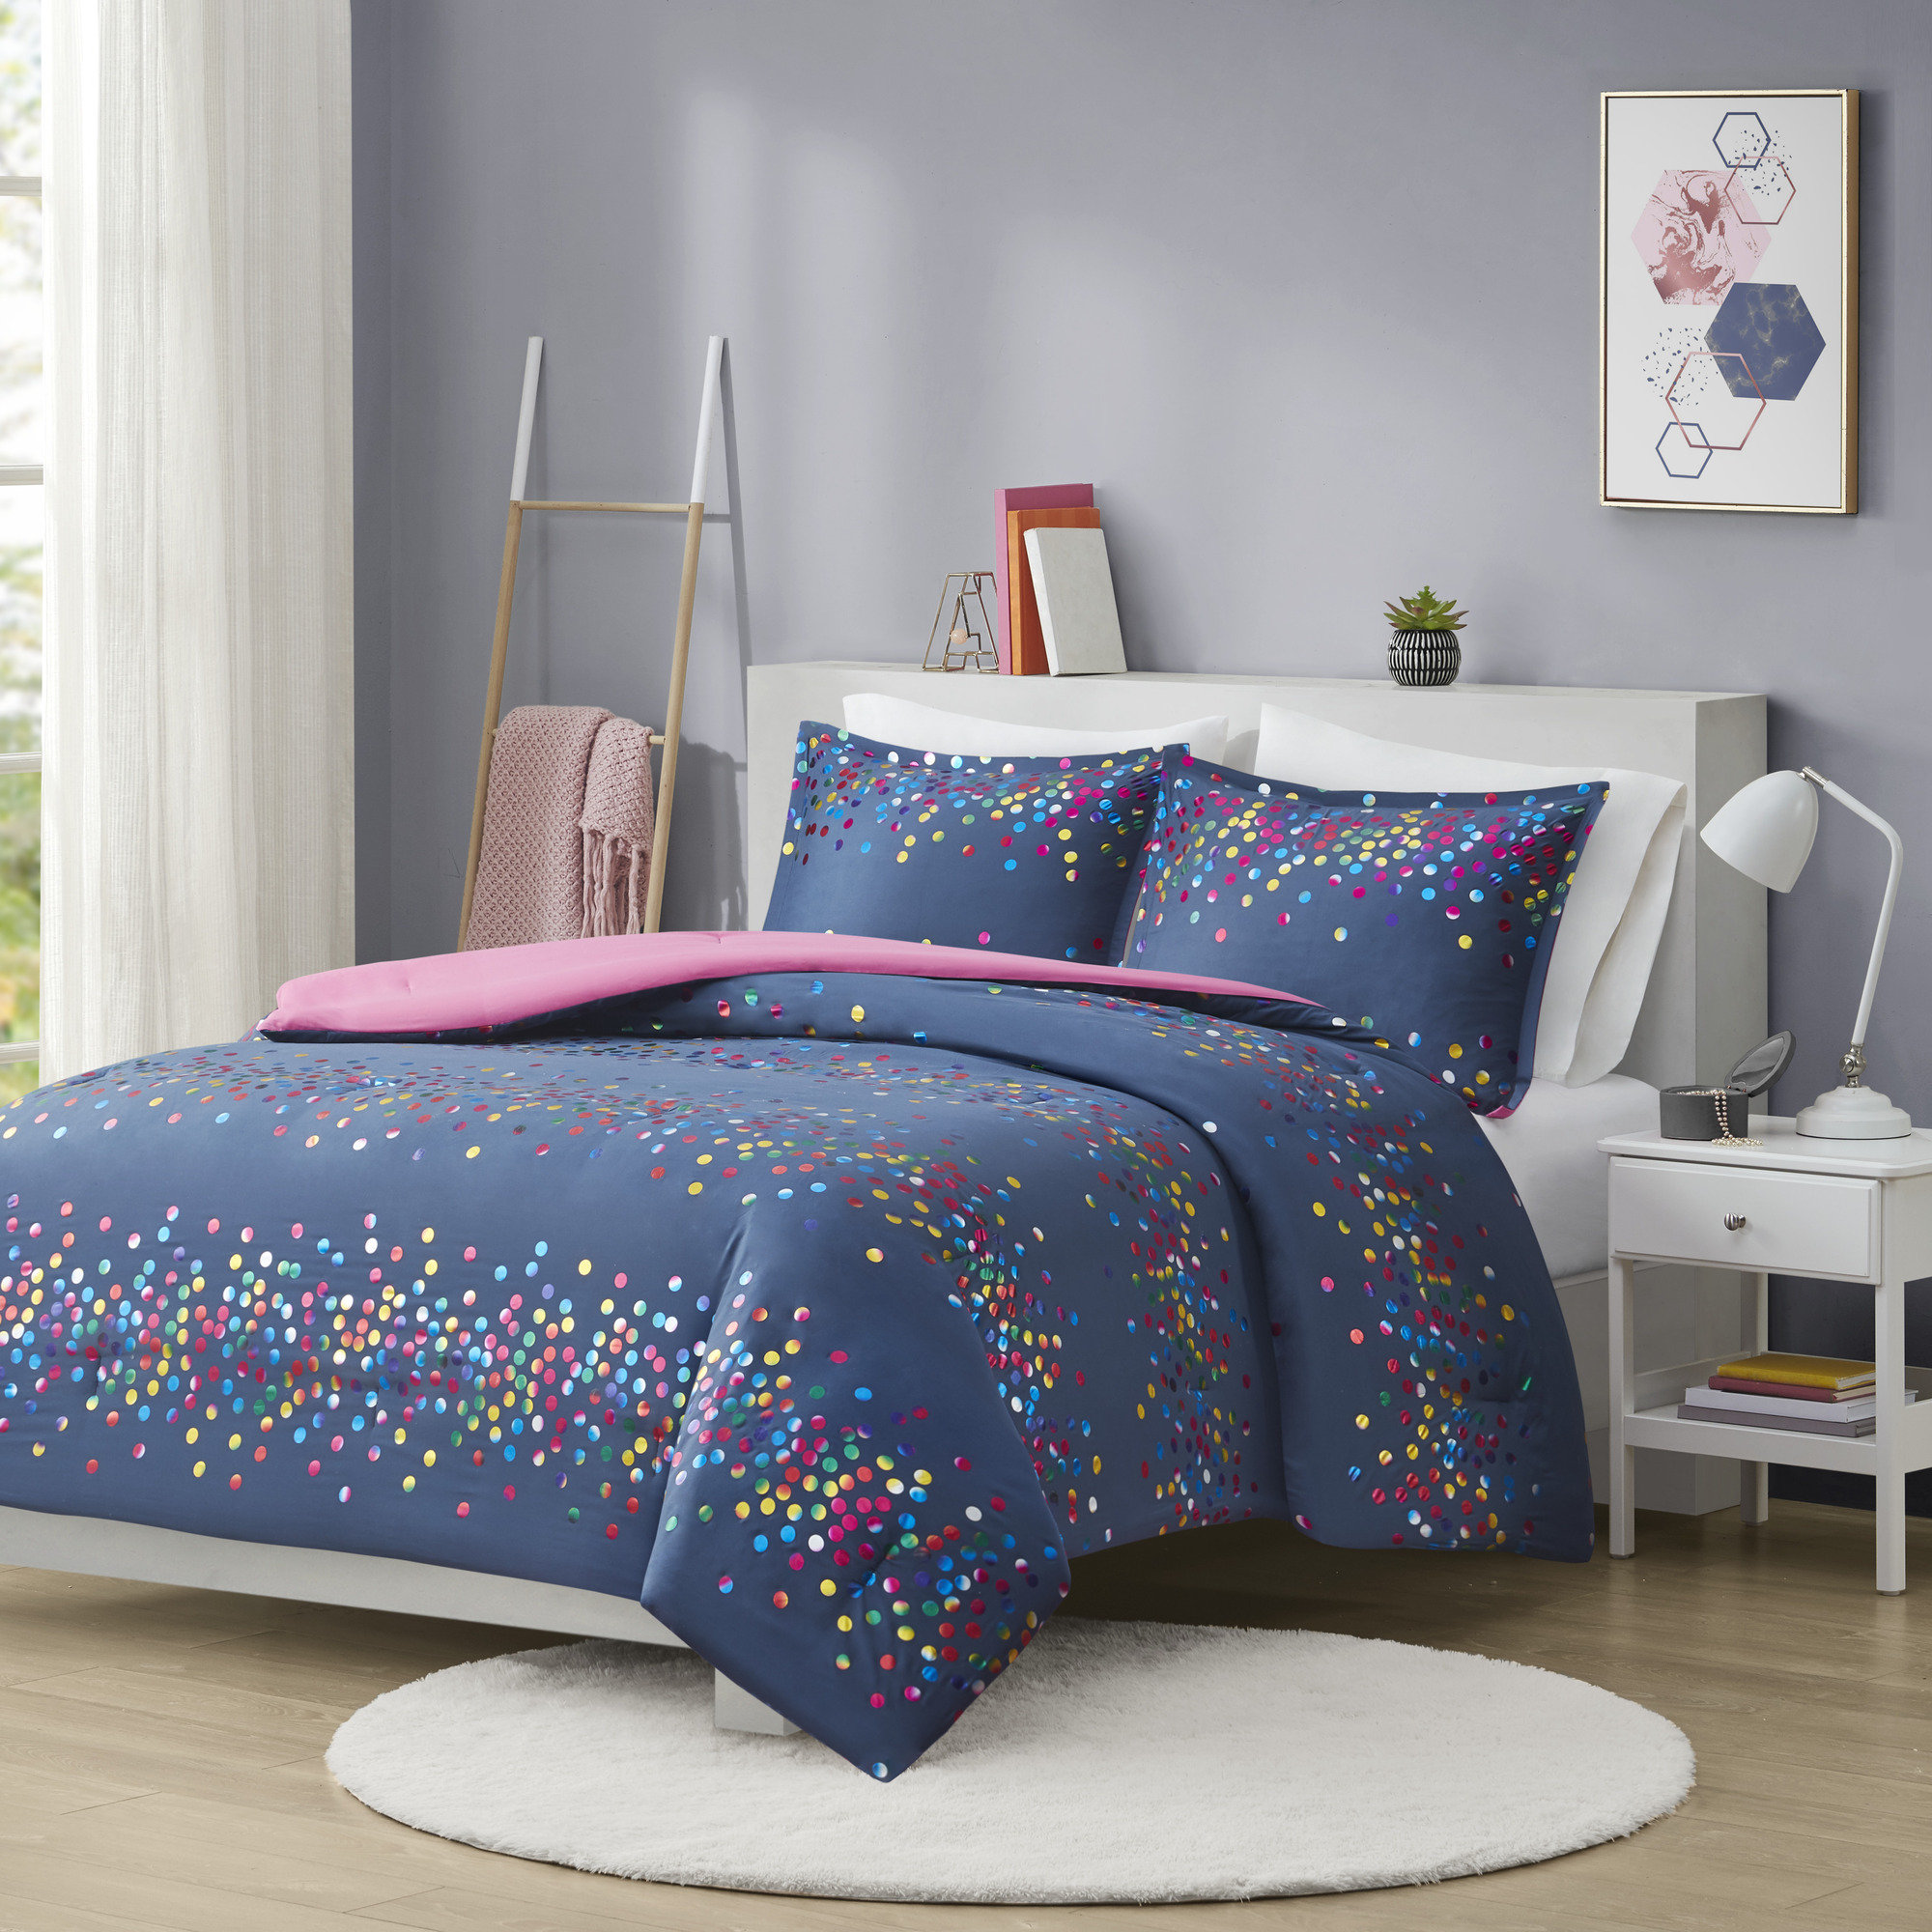 Blue Lv Multicolored Print Bedding Set - 1 Duvet, 1 Bed Sheet And 4  Pillowcases.